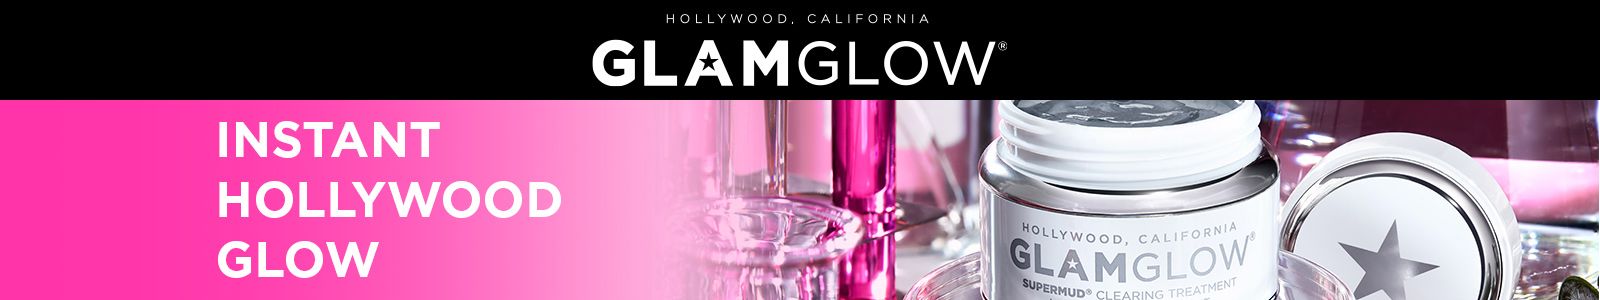  Holly Wood, California, Instant Hollywood Glow